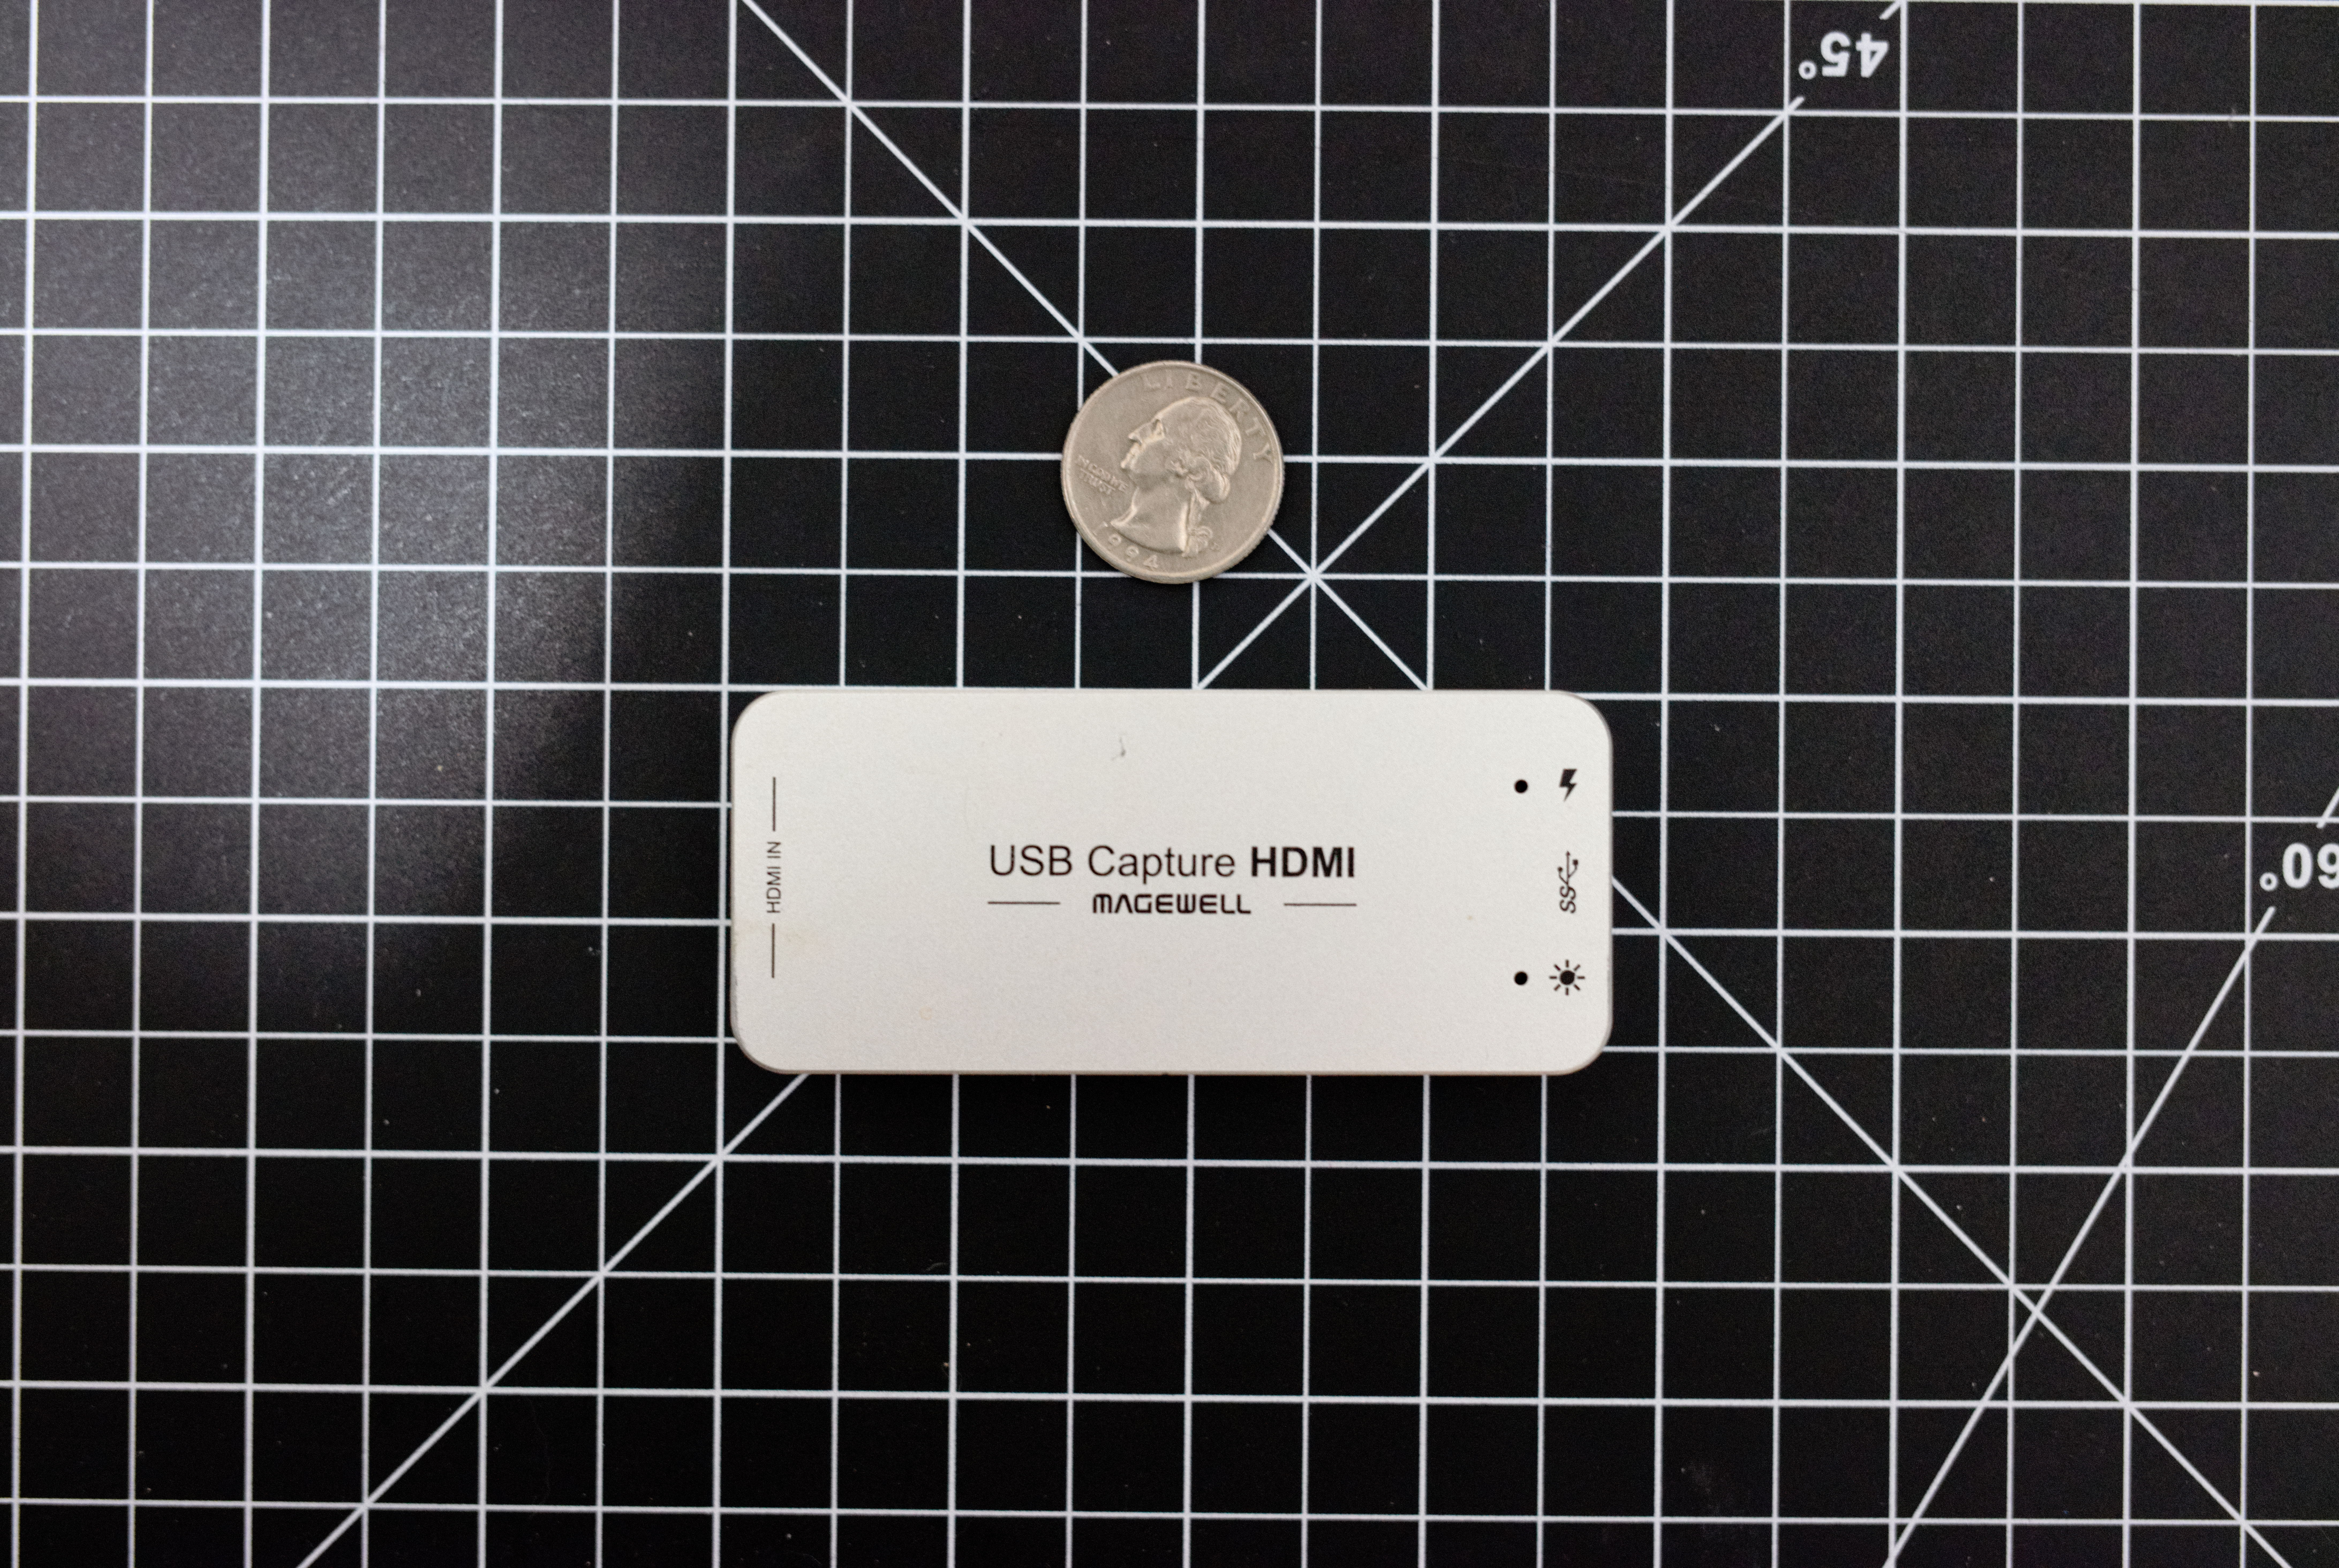 A first generation Magewell USB capture device